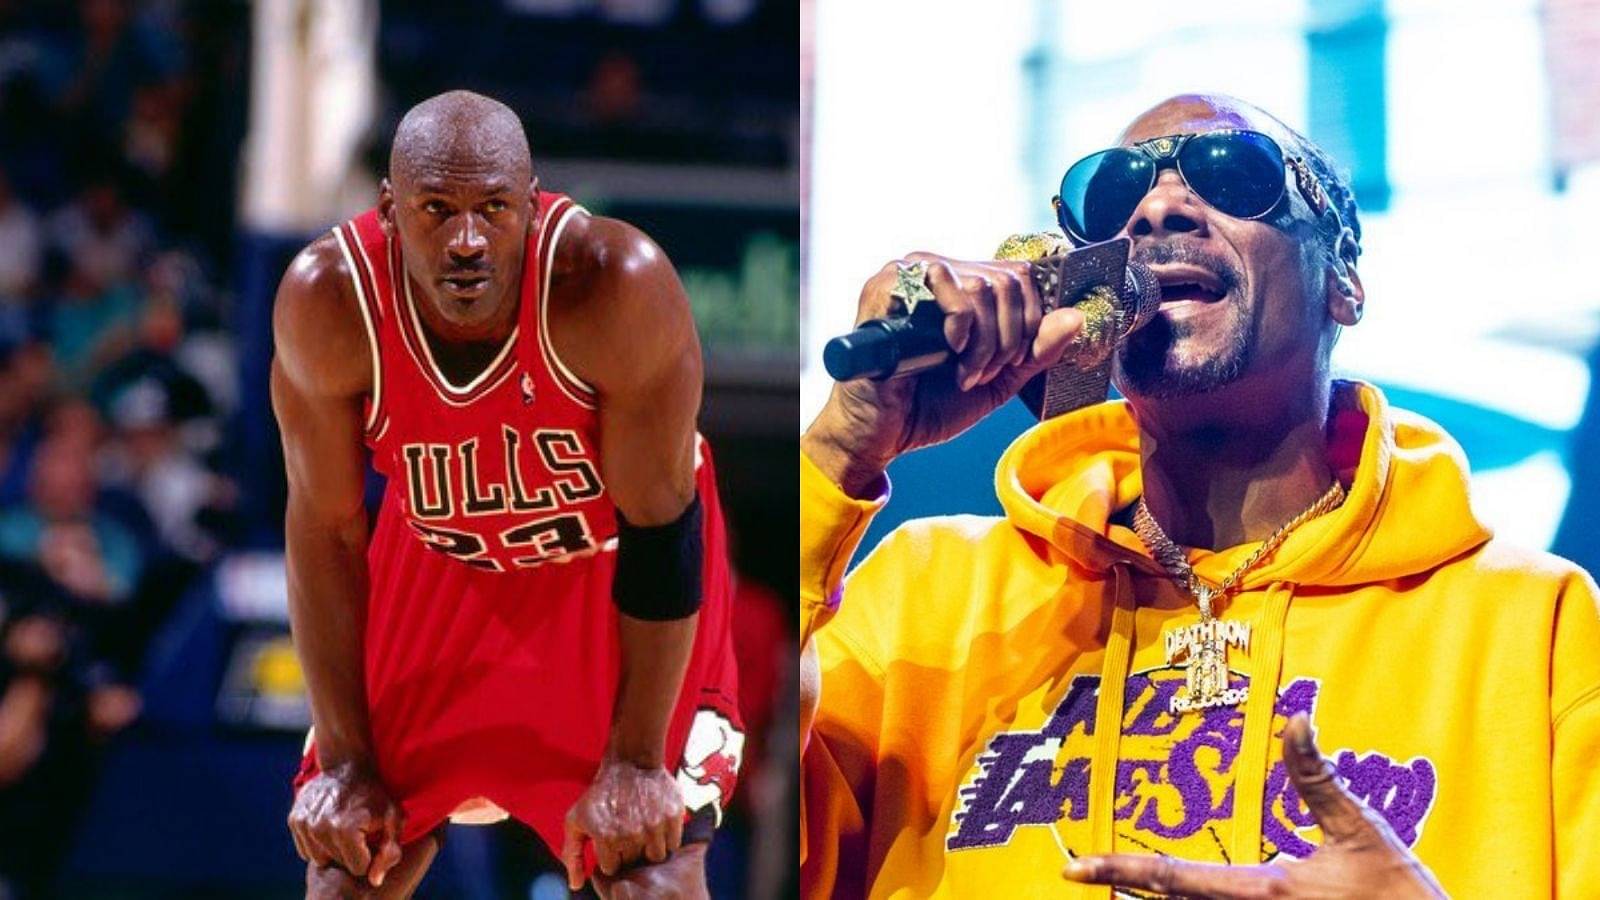 “I turned down $2 million to DJ a Michael Jordan event cause I was doing some other sh*t”: When Snoop Dogg rejected the only offer he got to meet ‘His Airness’, regrets it to this day